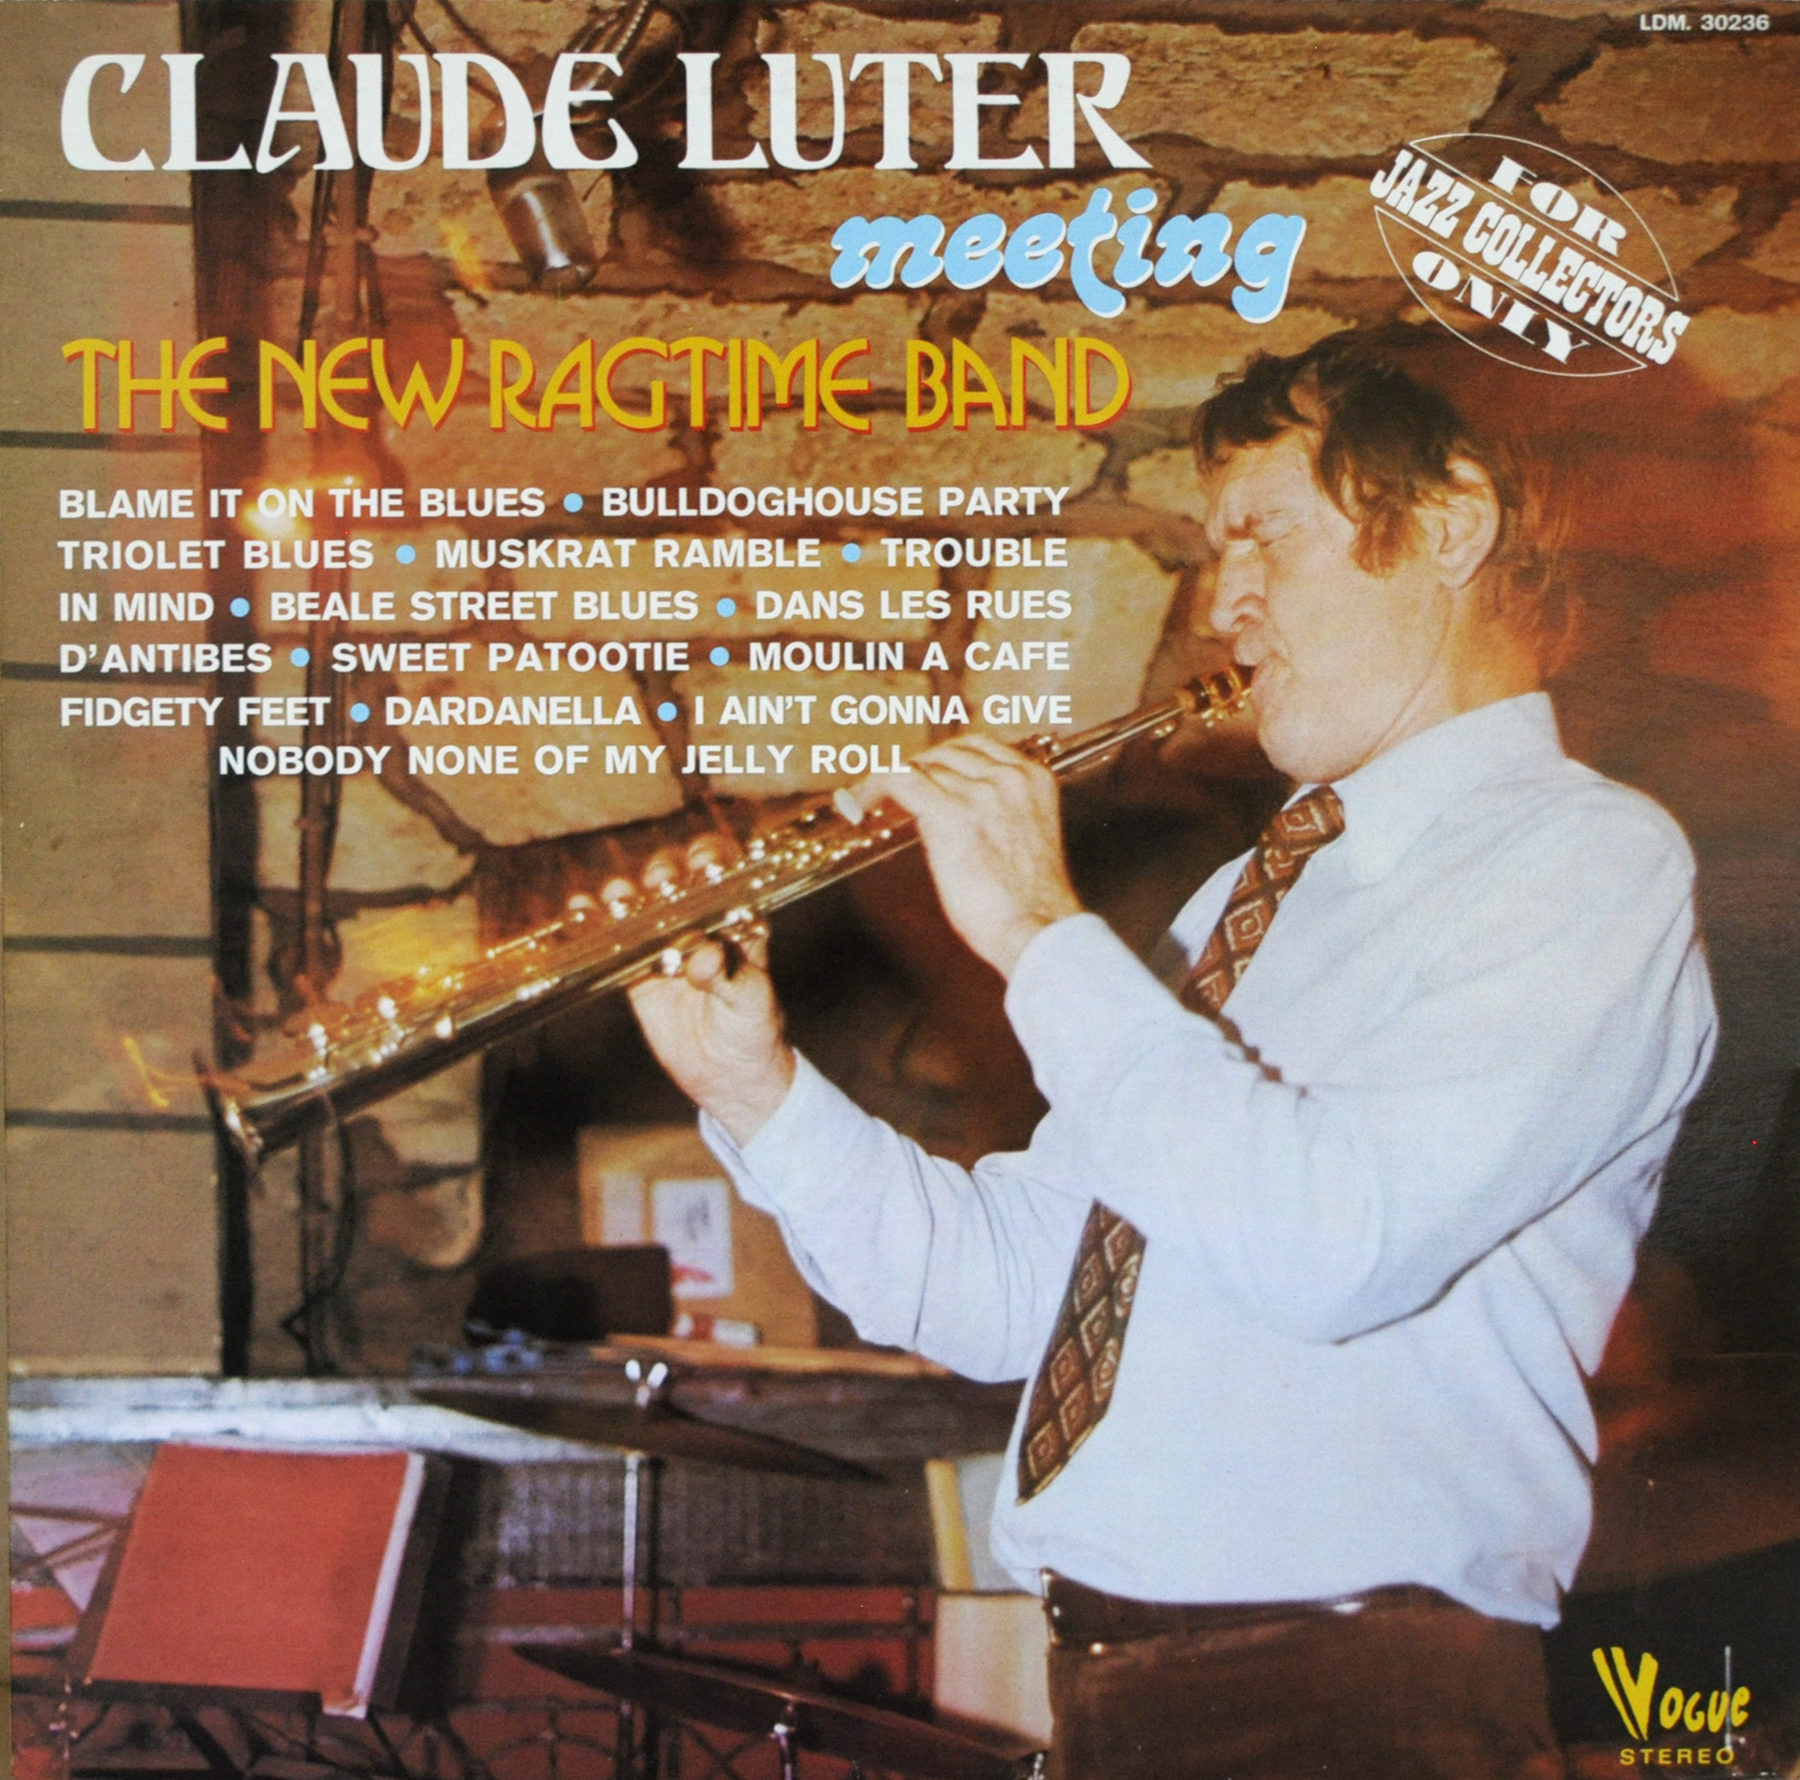 Buy vinyl artist% Claude Luter meeting The New Ragtime Band for sale